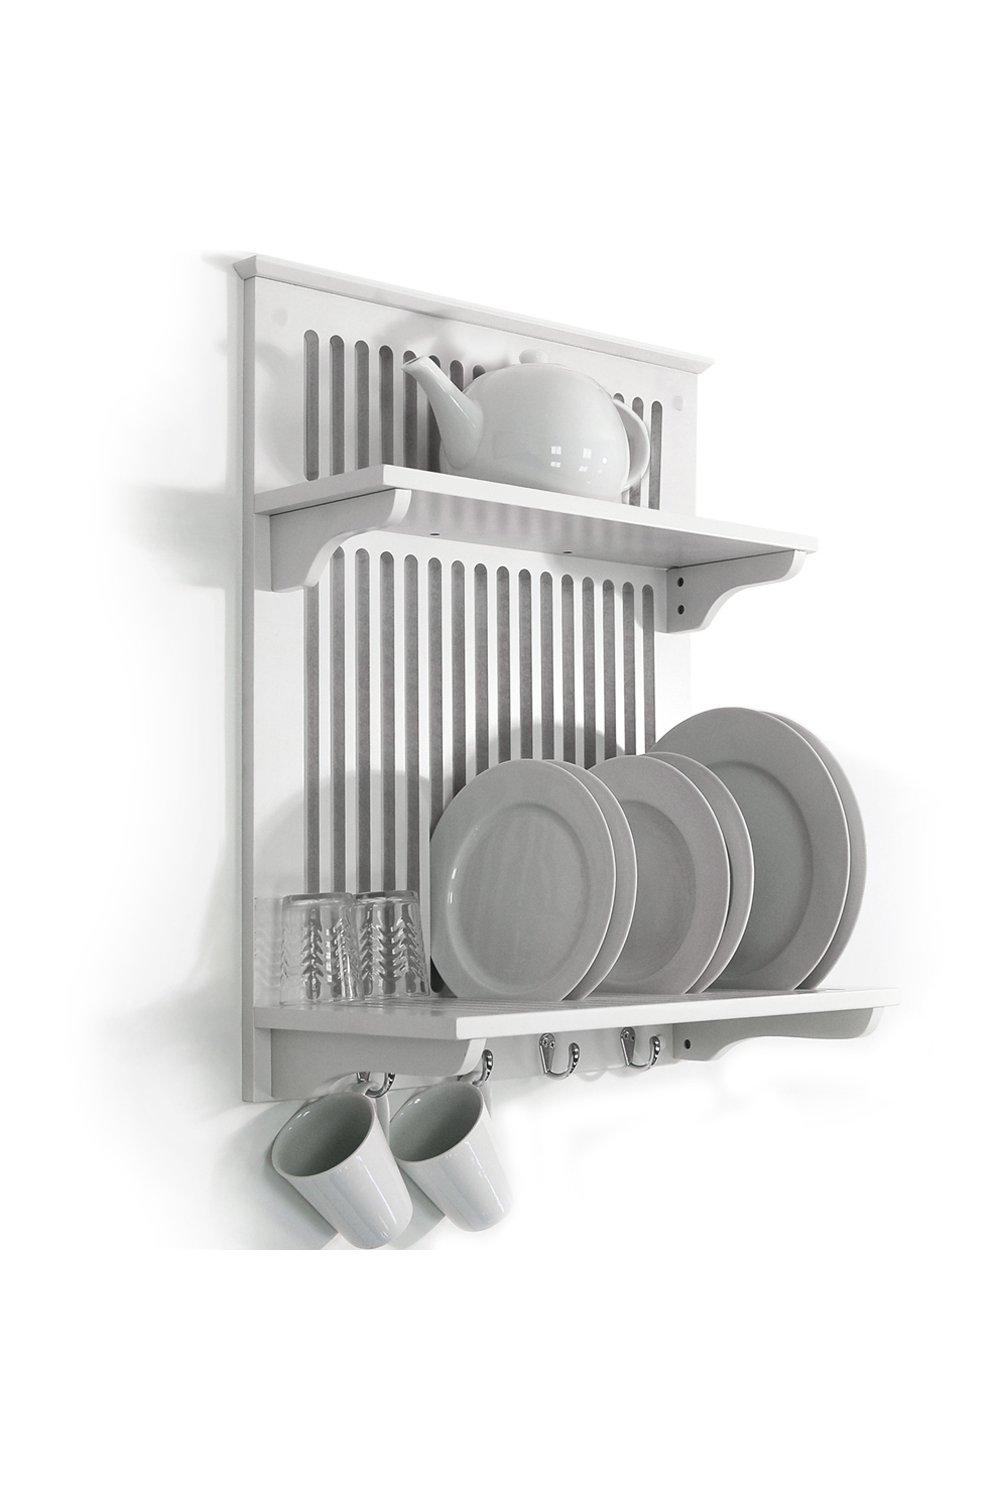 'Novel'  Kitchen Plate Bowl Cup Display  Wall Rack Shelves With Hooks  White